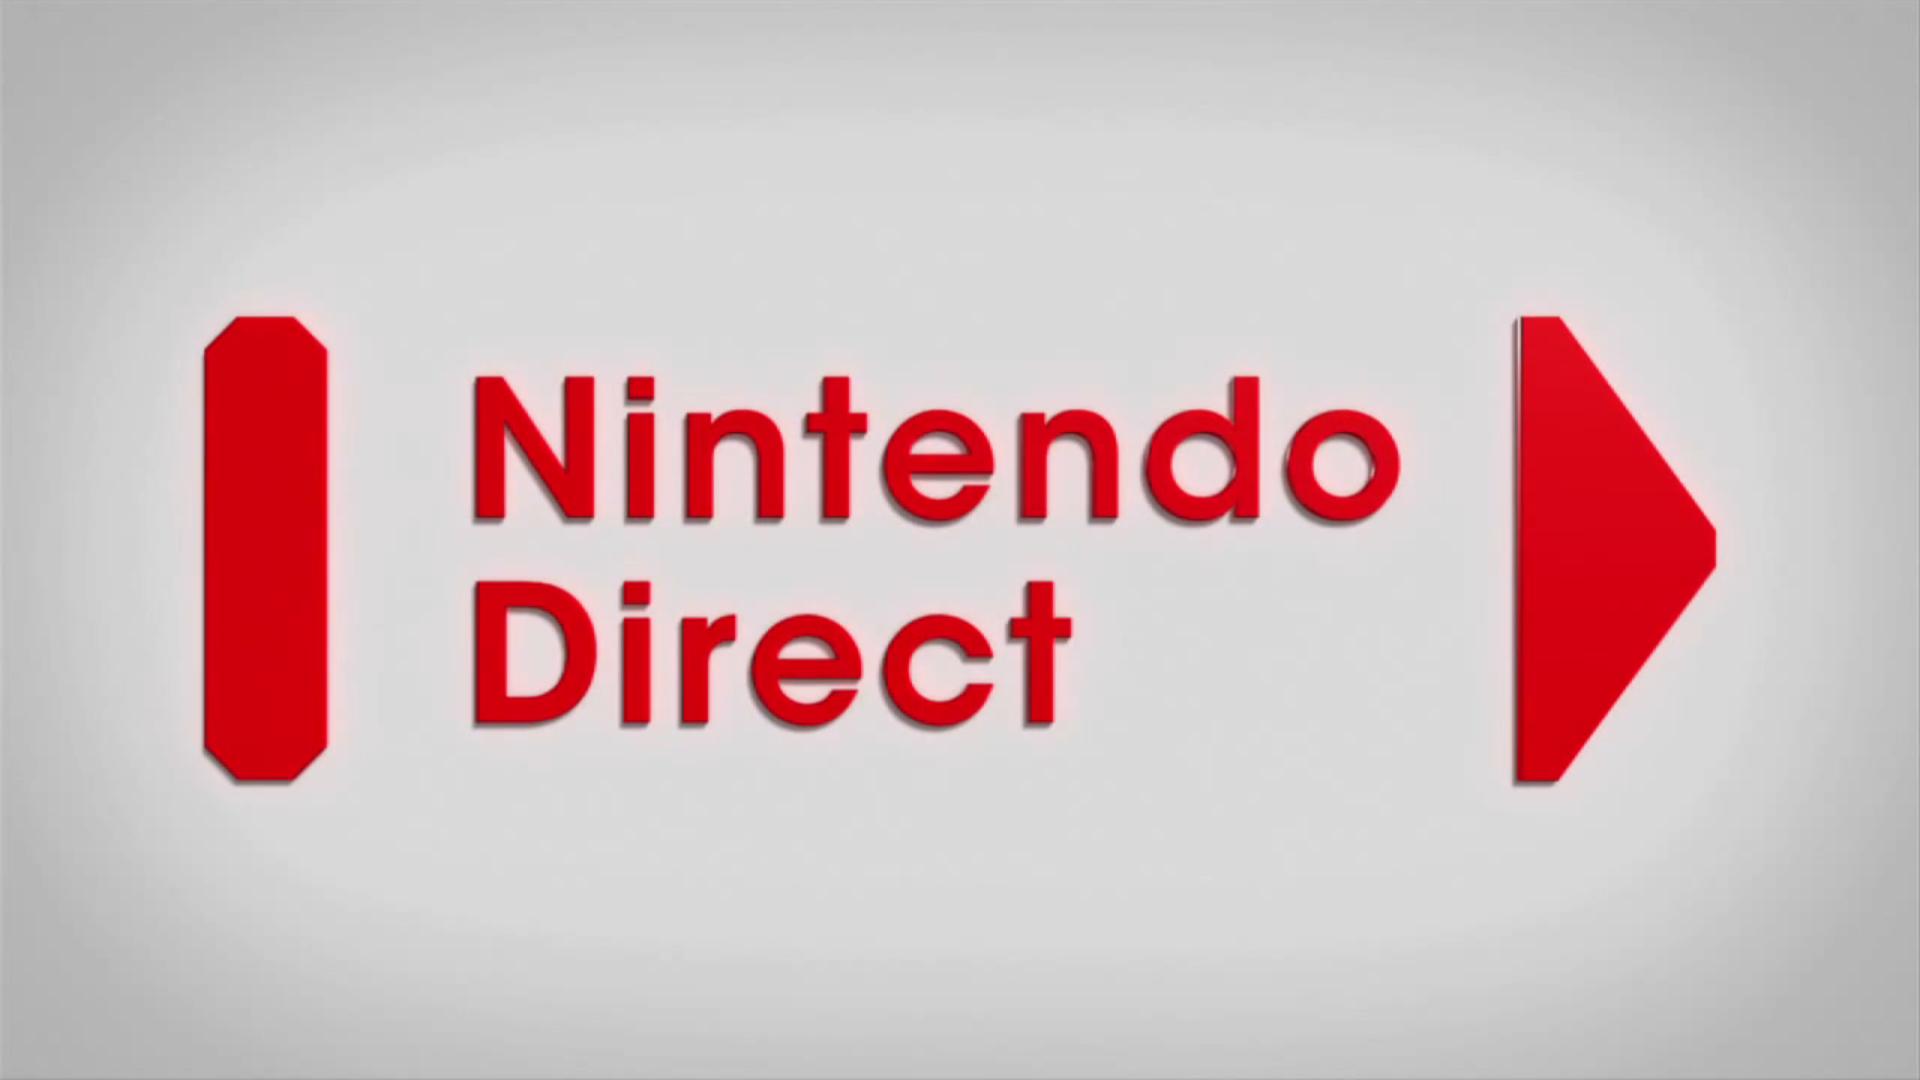 Stuplr — Nintendo Direct 2023.6.21 Summary. There are 25